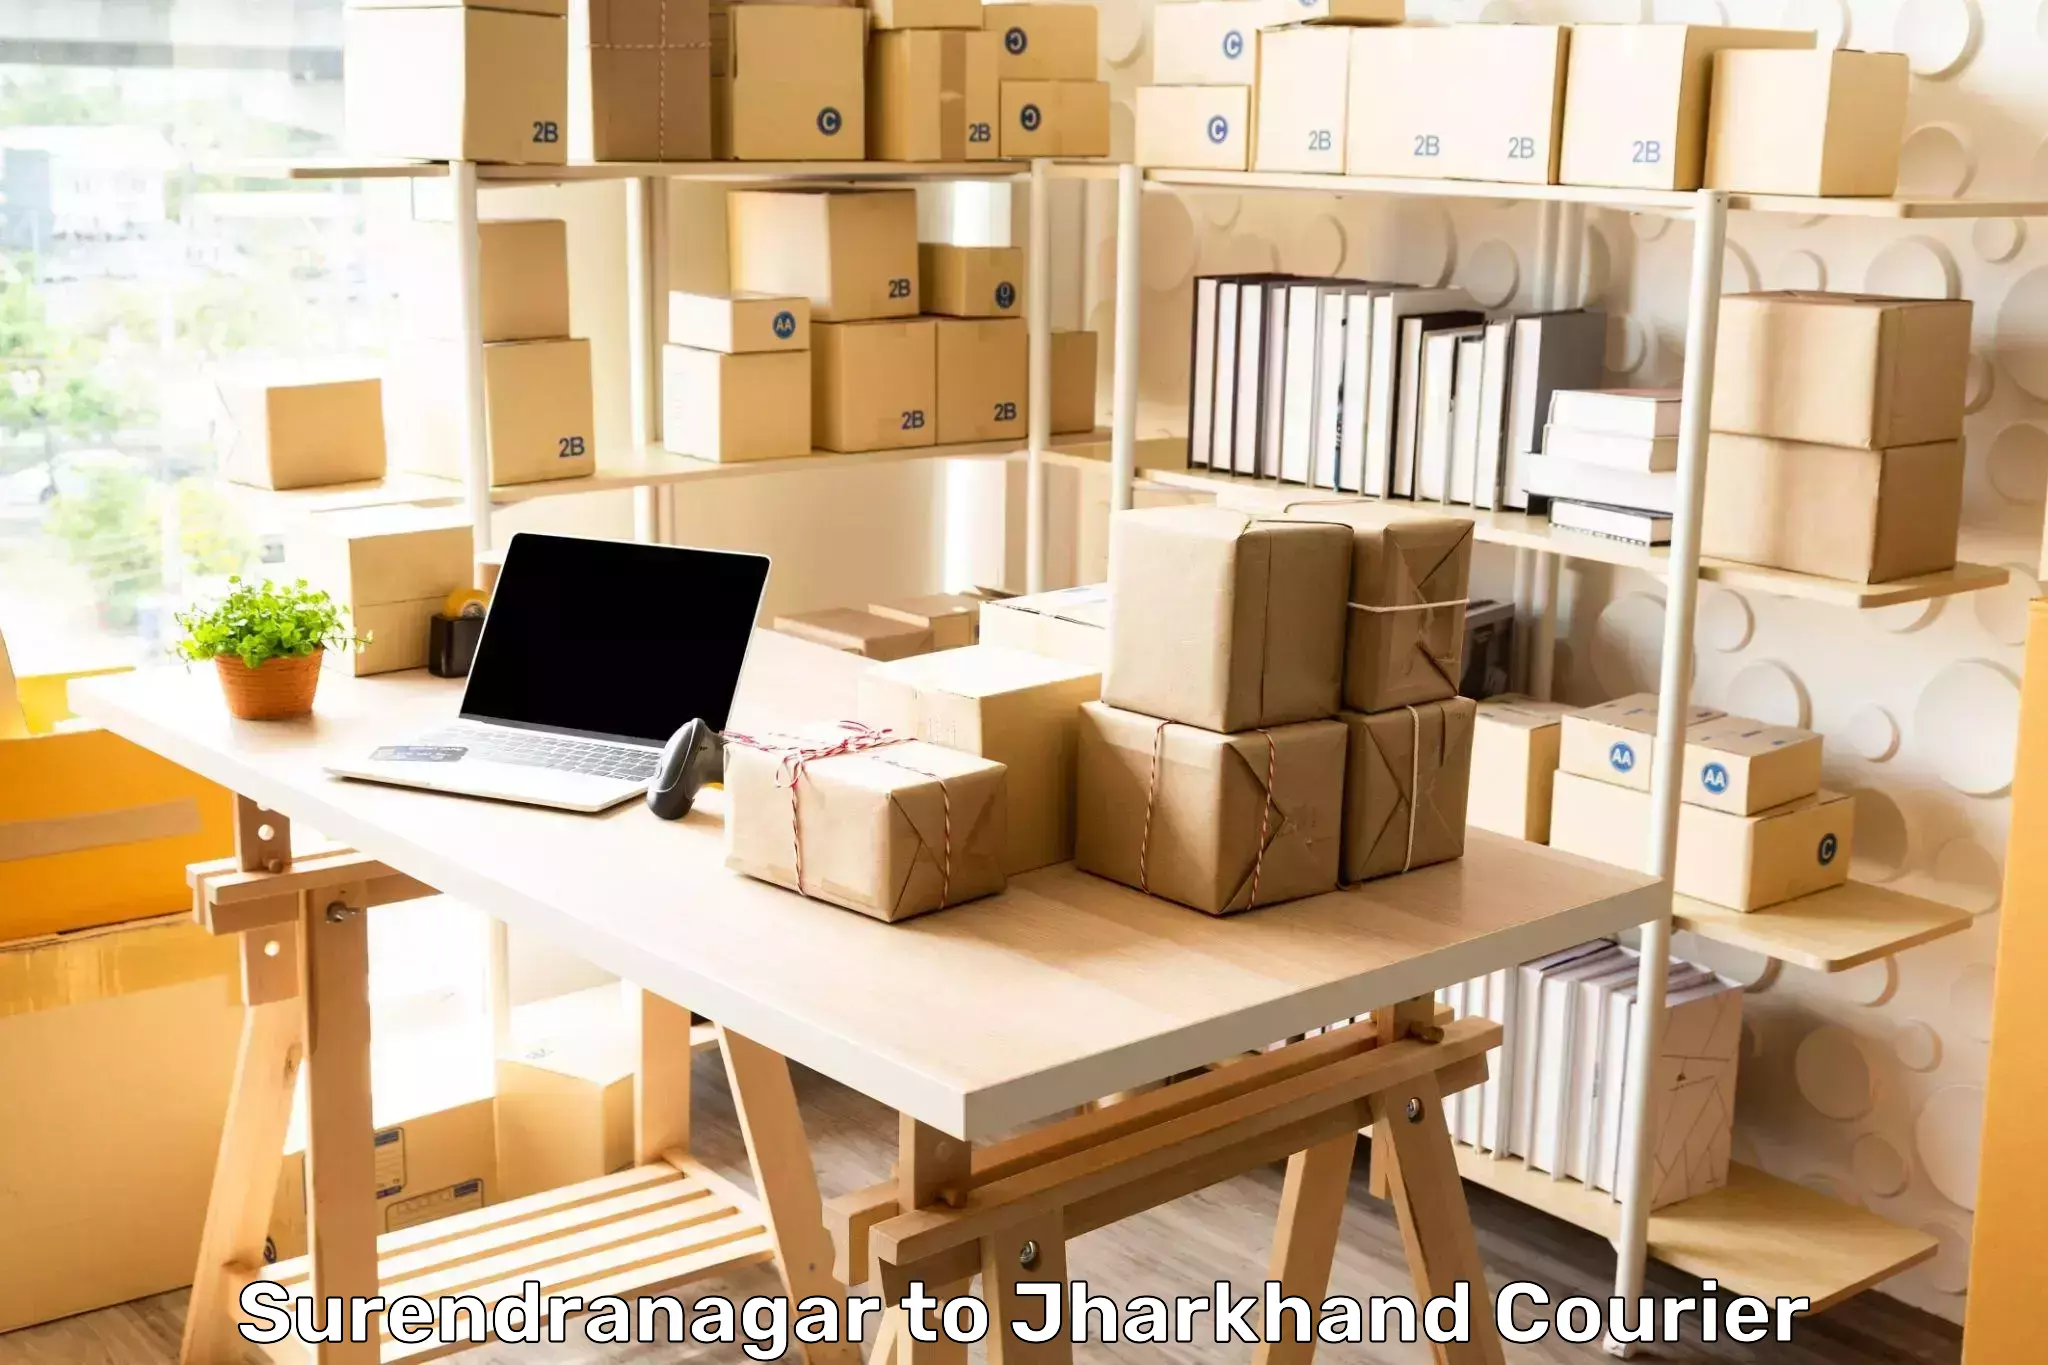 Dynamic courier operations Surendranagar to Jharkhand